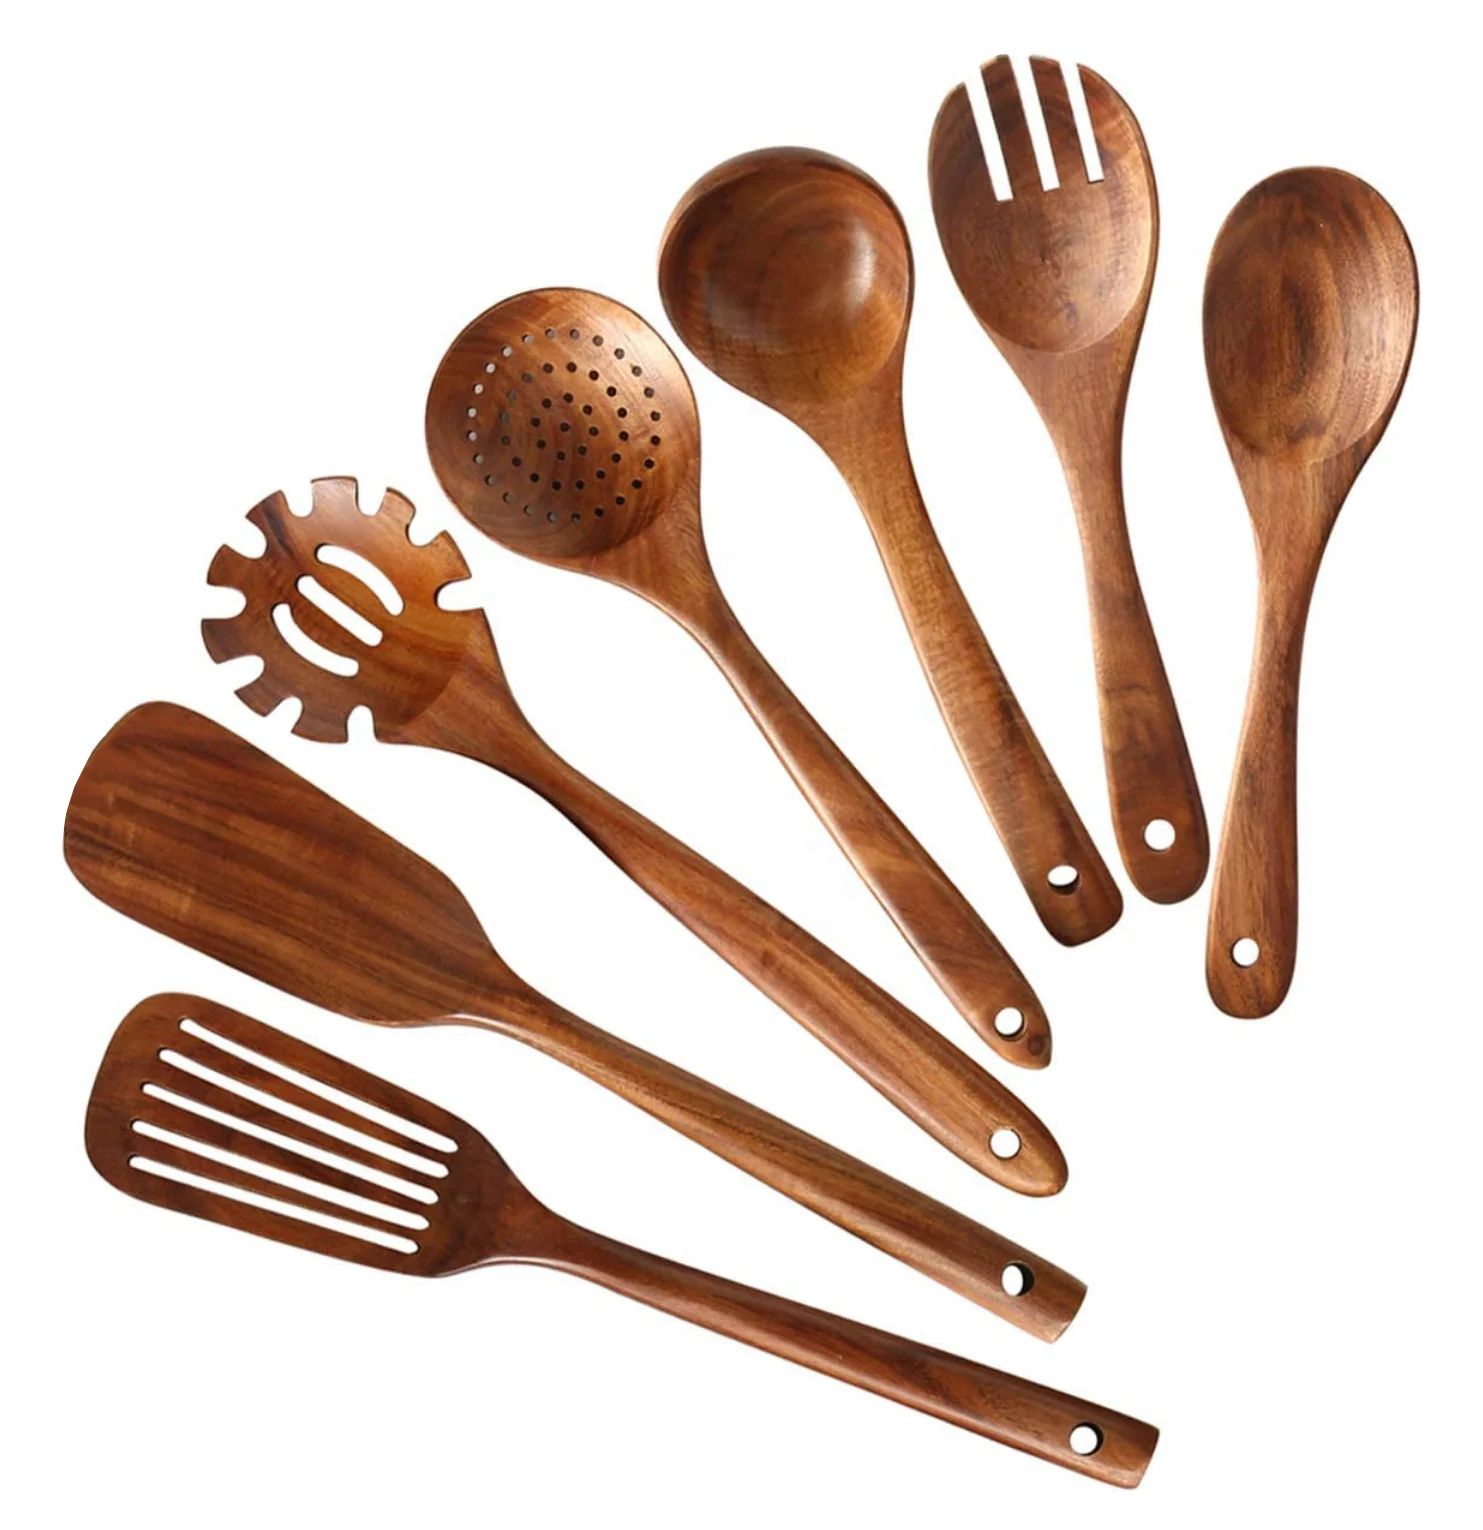 

Wooden Kitchen Utensil Set 7 Cooking Utensils Spatula Spoons for Cooking Nonstick Cookware, 100% Handmade by Natural Teak Wood